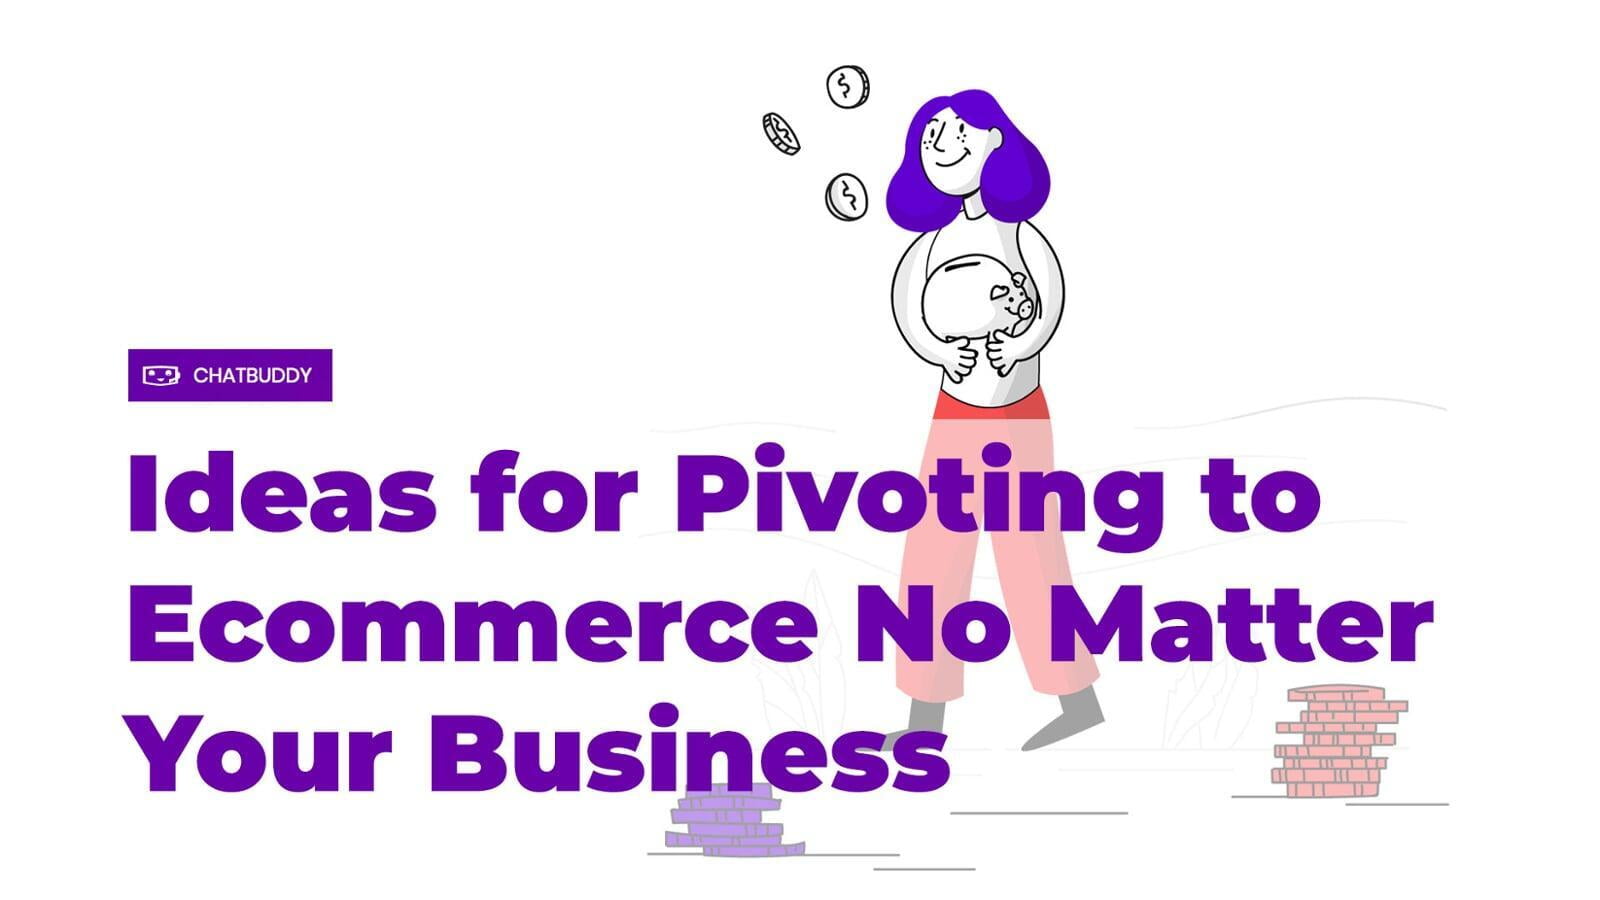 Ideas for Pivoting to Ecommerce No Matter Your Business